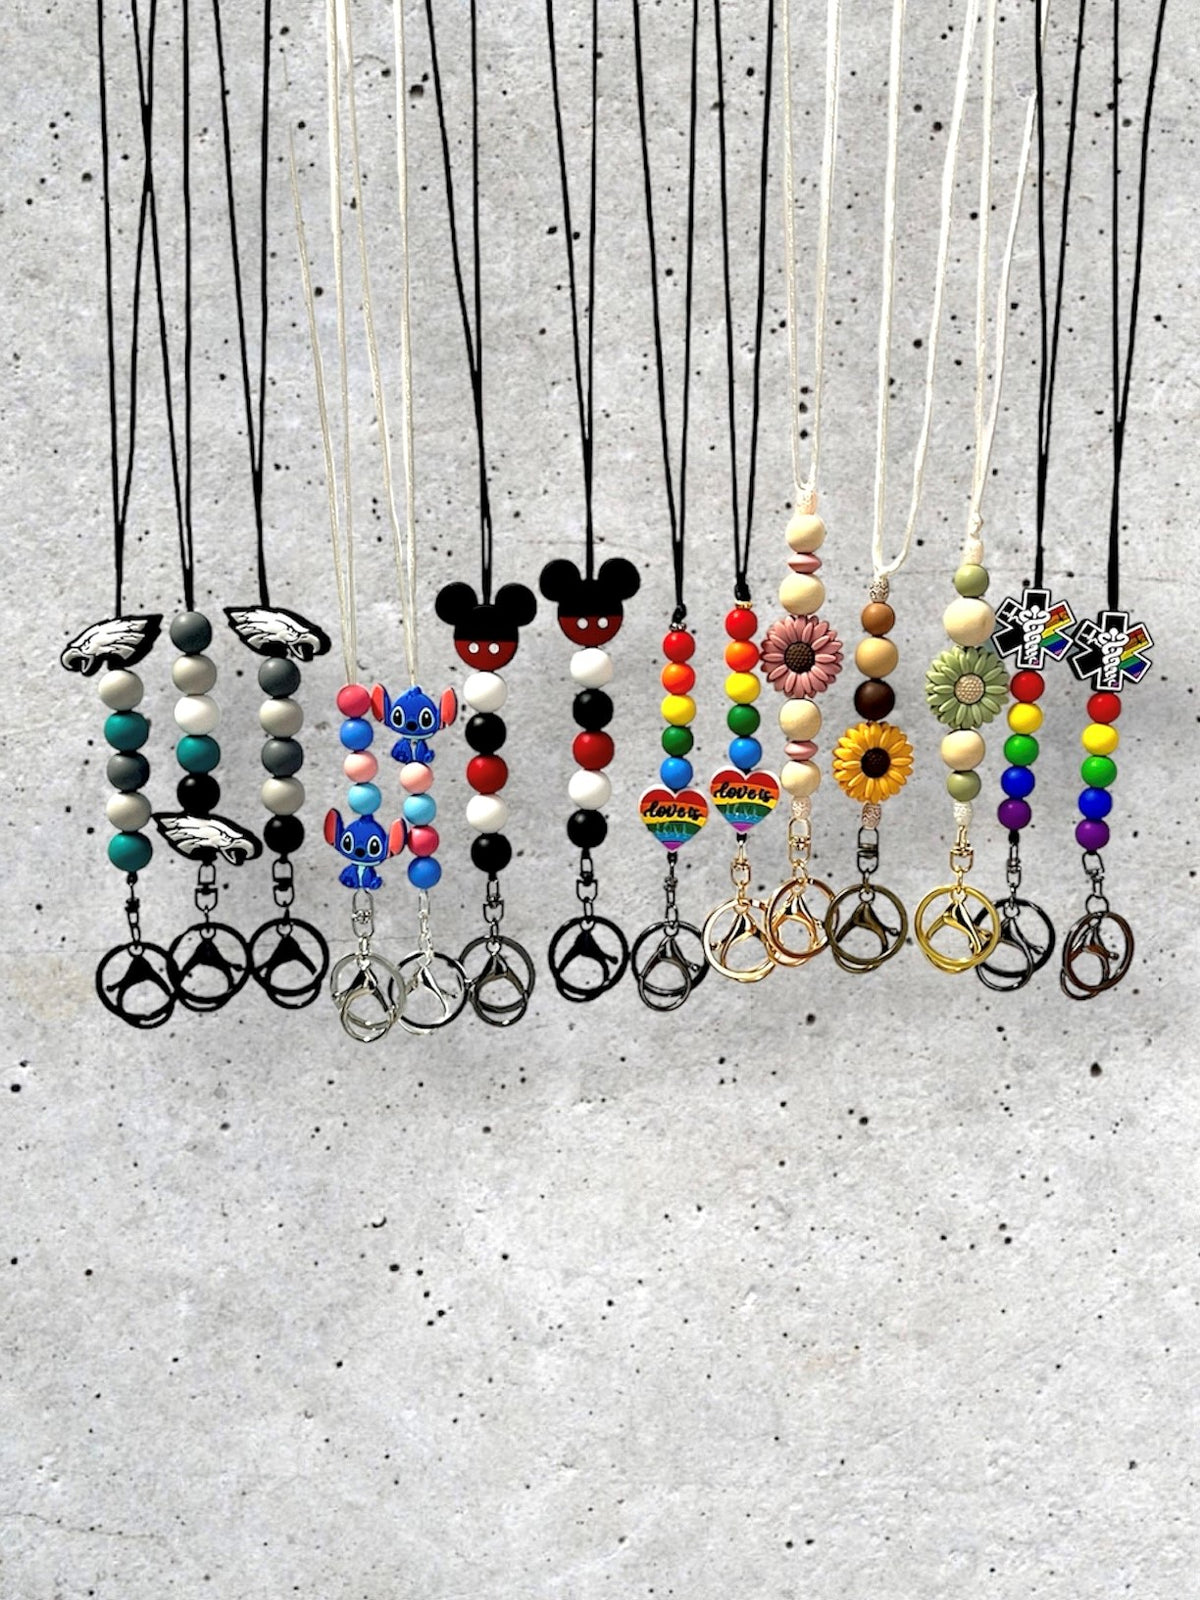 Handmade Silicone Bead Lanyards: Eagles Football, Sports, Stitch, Disney, Mickey mouse, Minnie Mouse, Love is Love, Pride, LGBTQ, Rainbow, Gay Pride, Awareness & Inclusion, Daisy, Sunflower, EMT, EMS, Star of Life, Emergency Personnel, Medic, Medical, Emergency Responder Lanyard